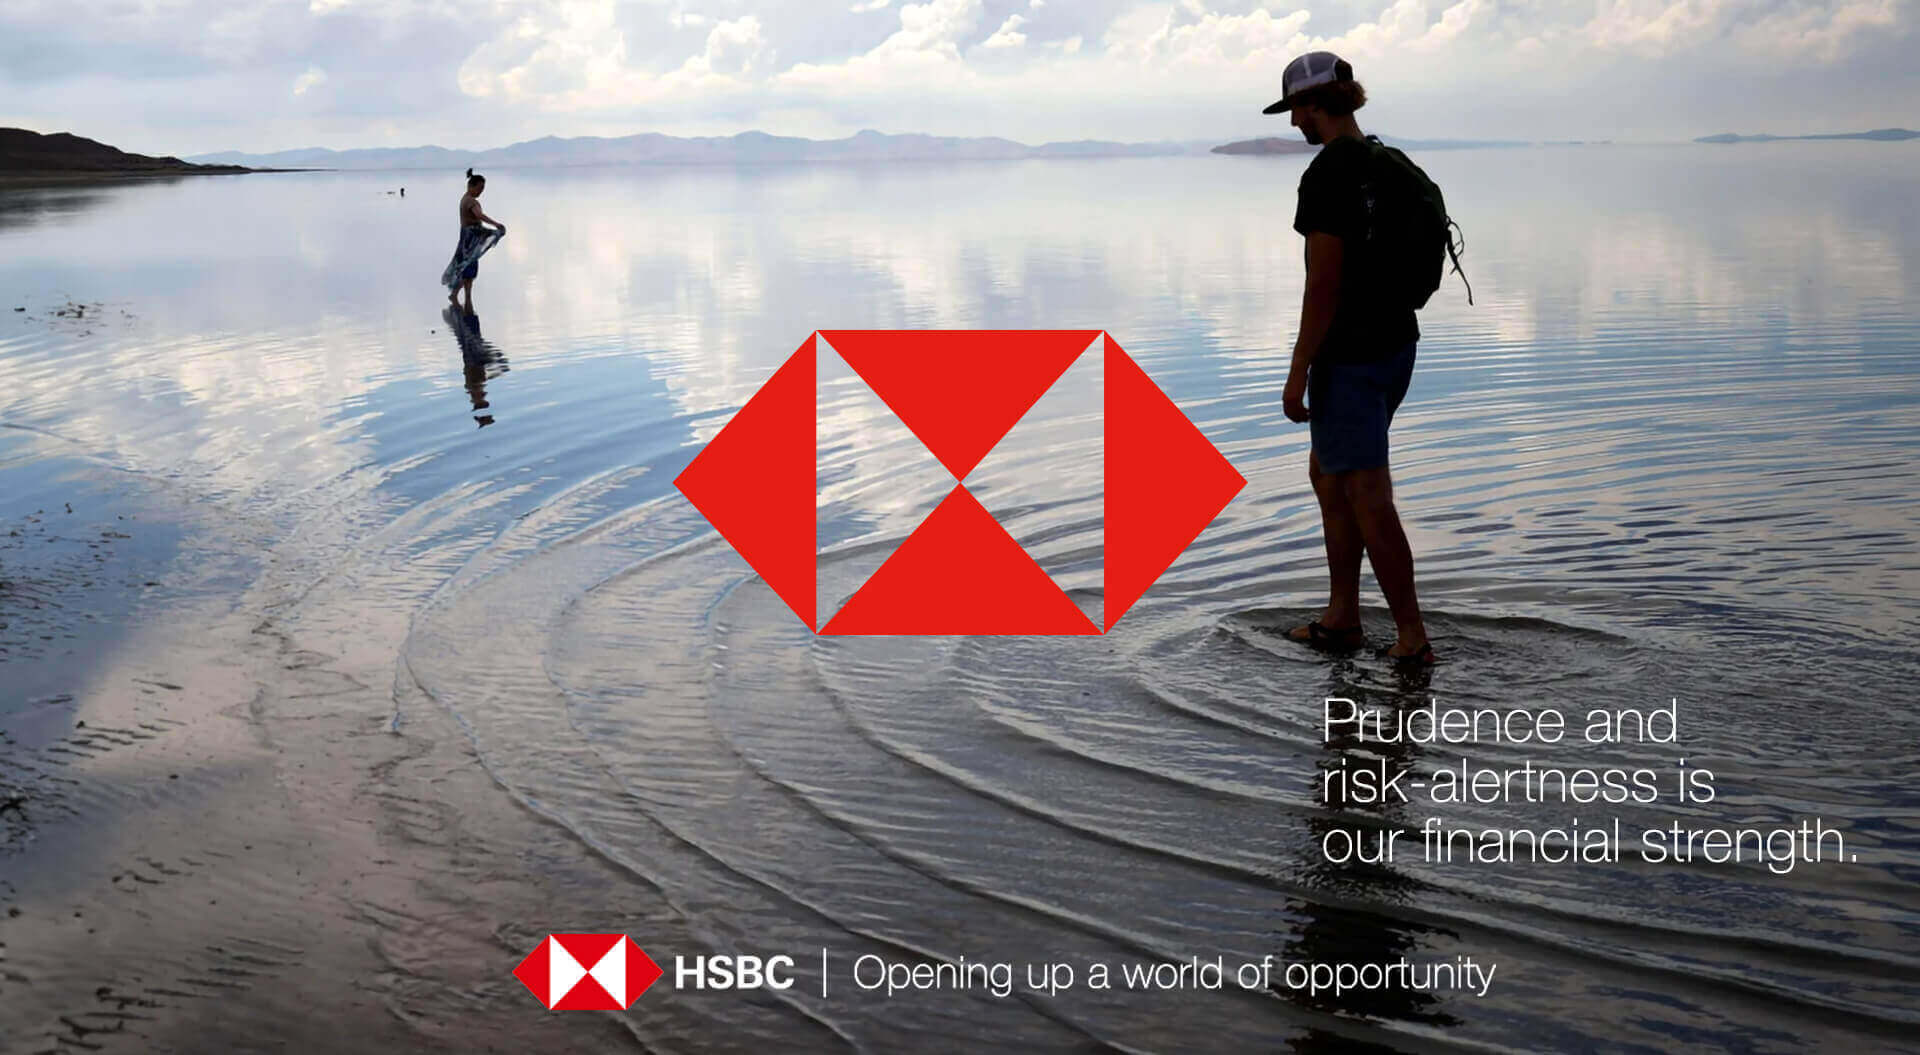 HSBC Bank Advertising design message, “Prudence and risk-alertness is our financial strength” - logo design - strap line “Opening up a world of opportunity”